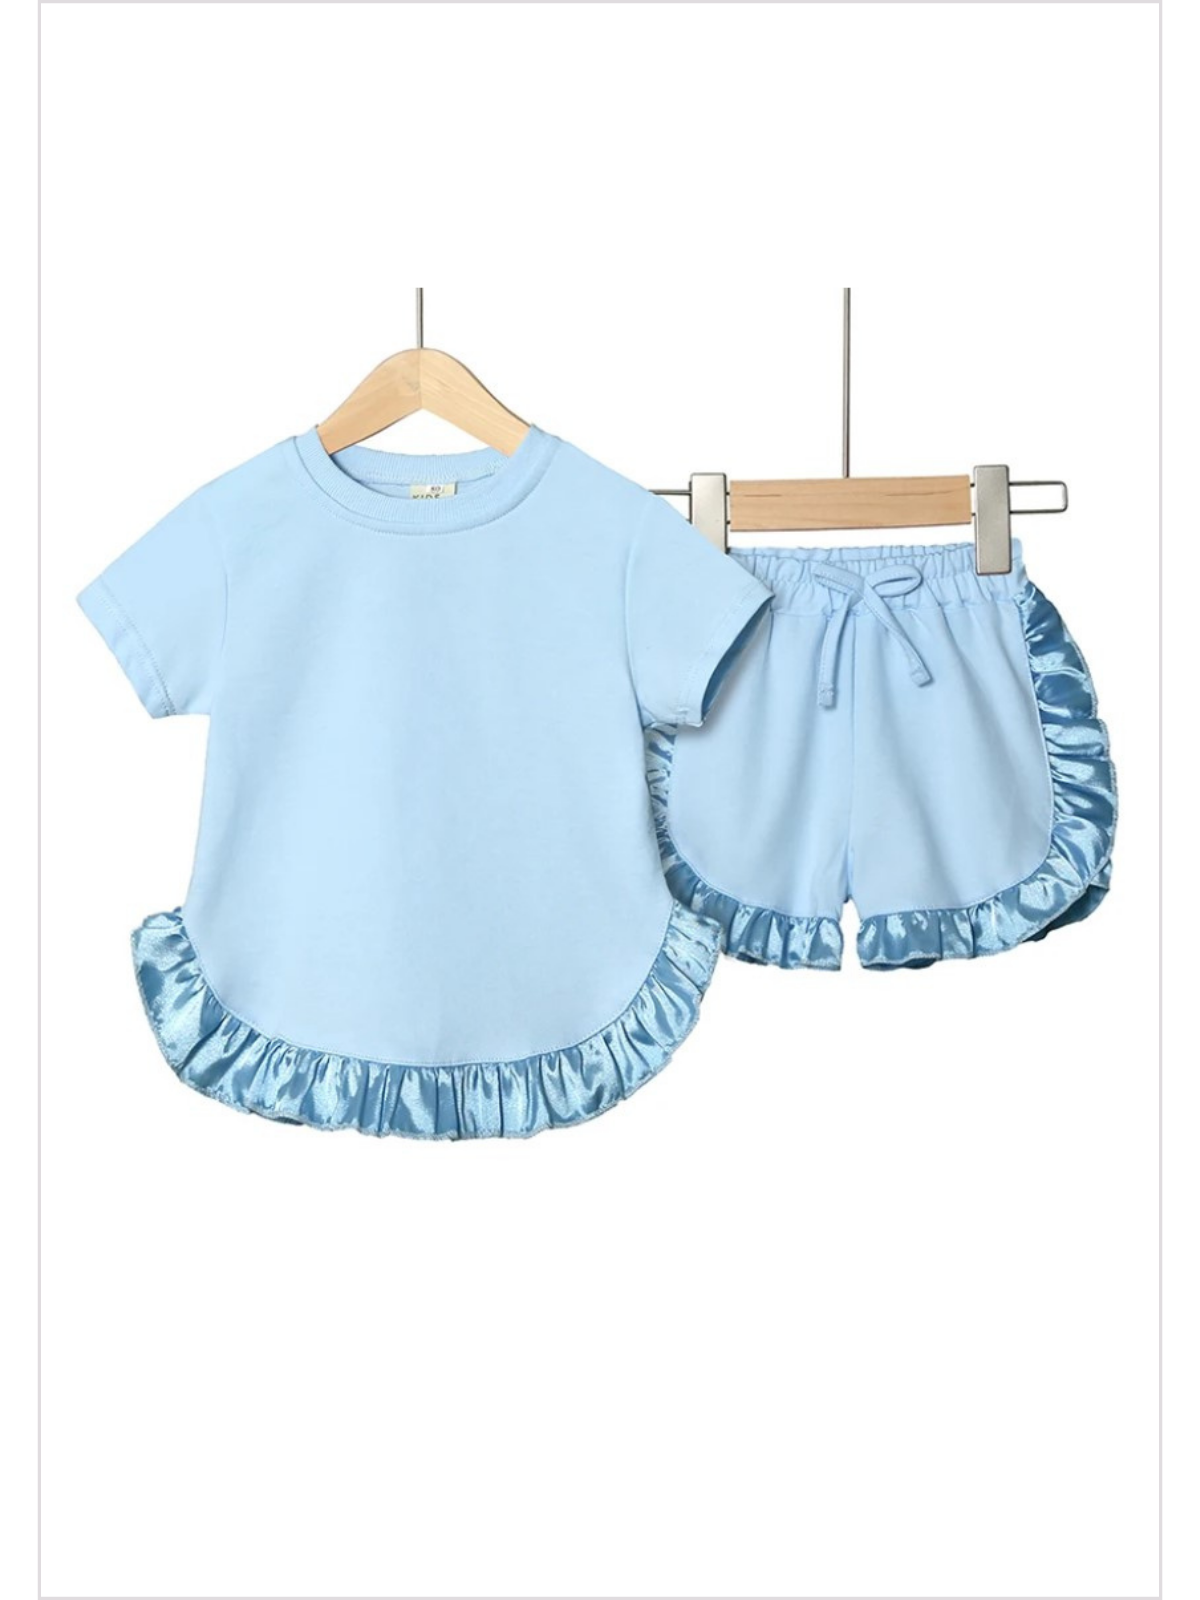 Ruffle Trim Tee and Shorts Set | Summer Outfits | Mia Belle Girls